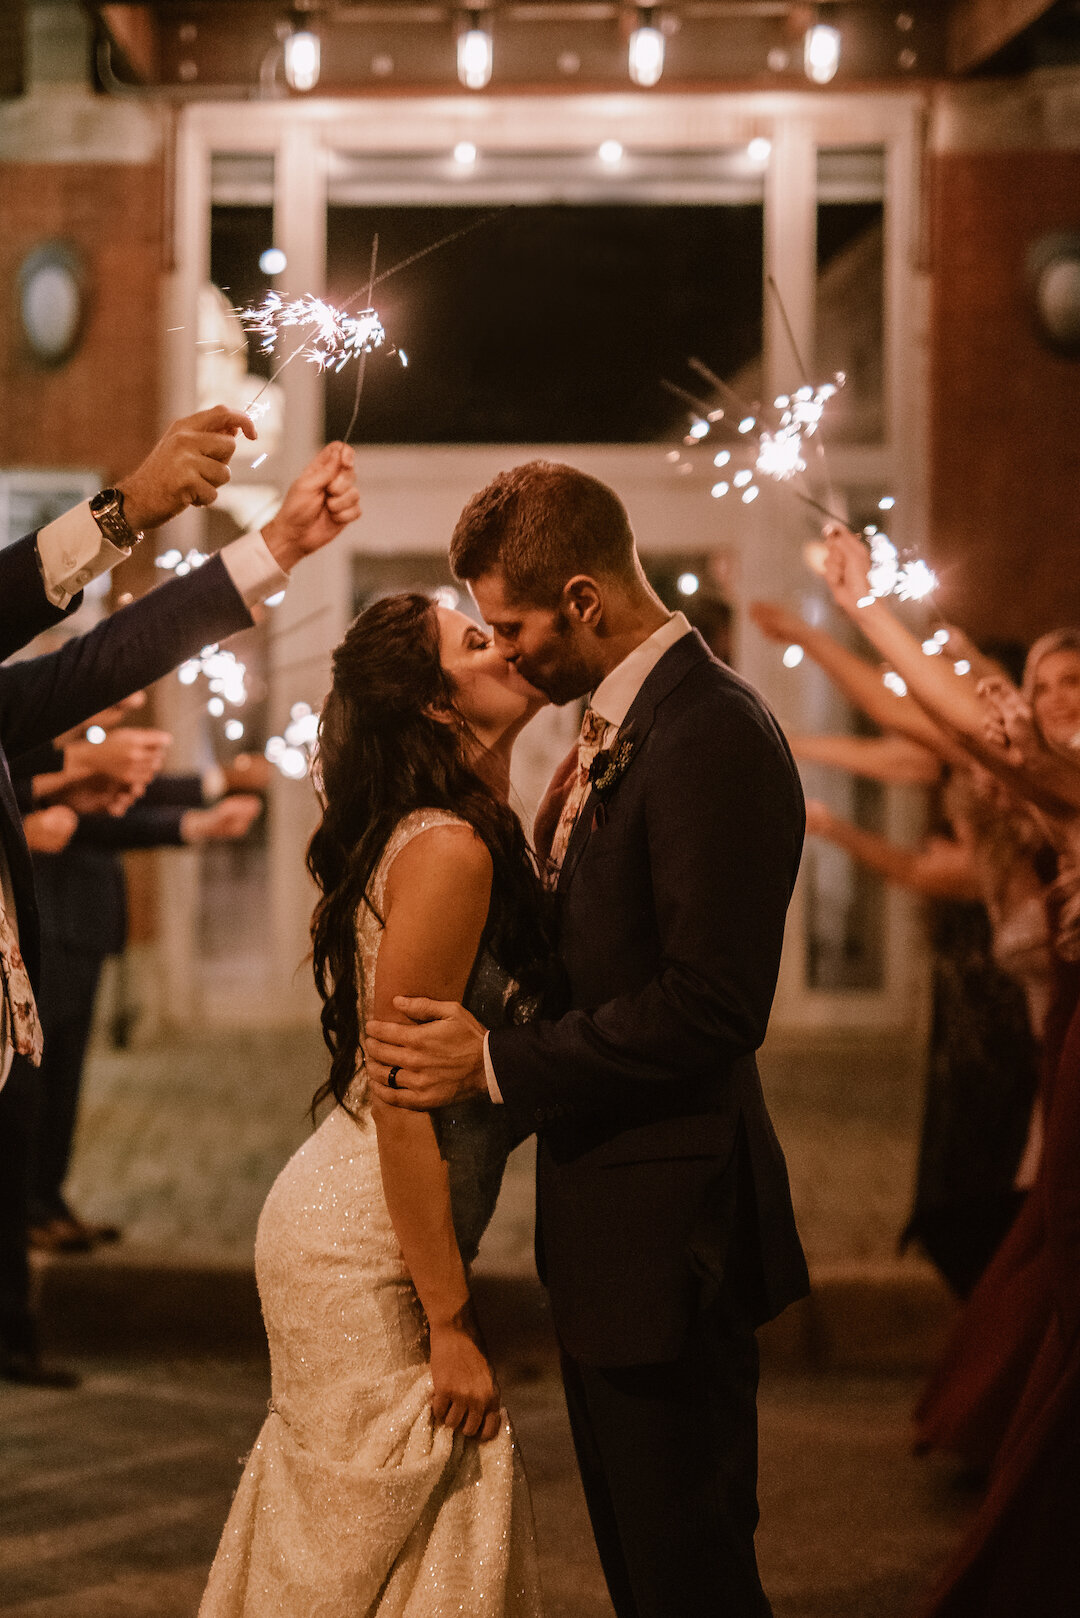 Boho Glam Music-Inspired Chicago Wedding with a Hint of Italia planned by Blush and Borrowed featured on CHI thee WED